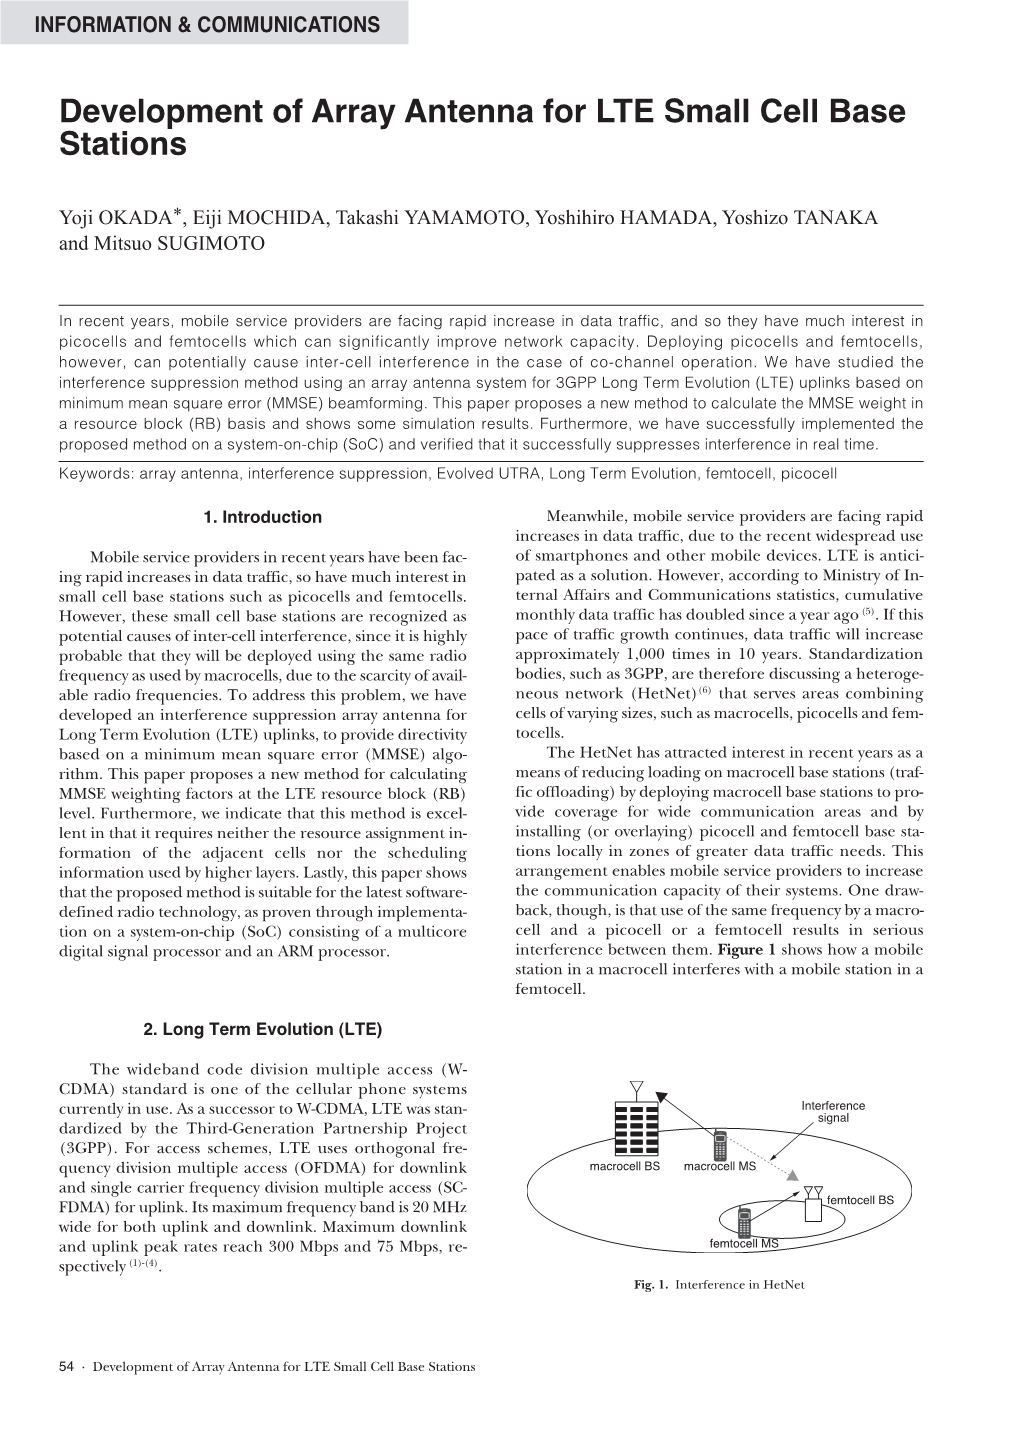 Development of Array Antenna for LTE Small Cell Base Stations Pdf 0.4 MB